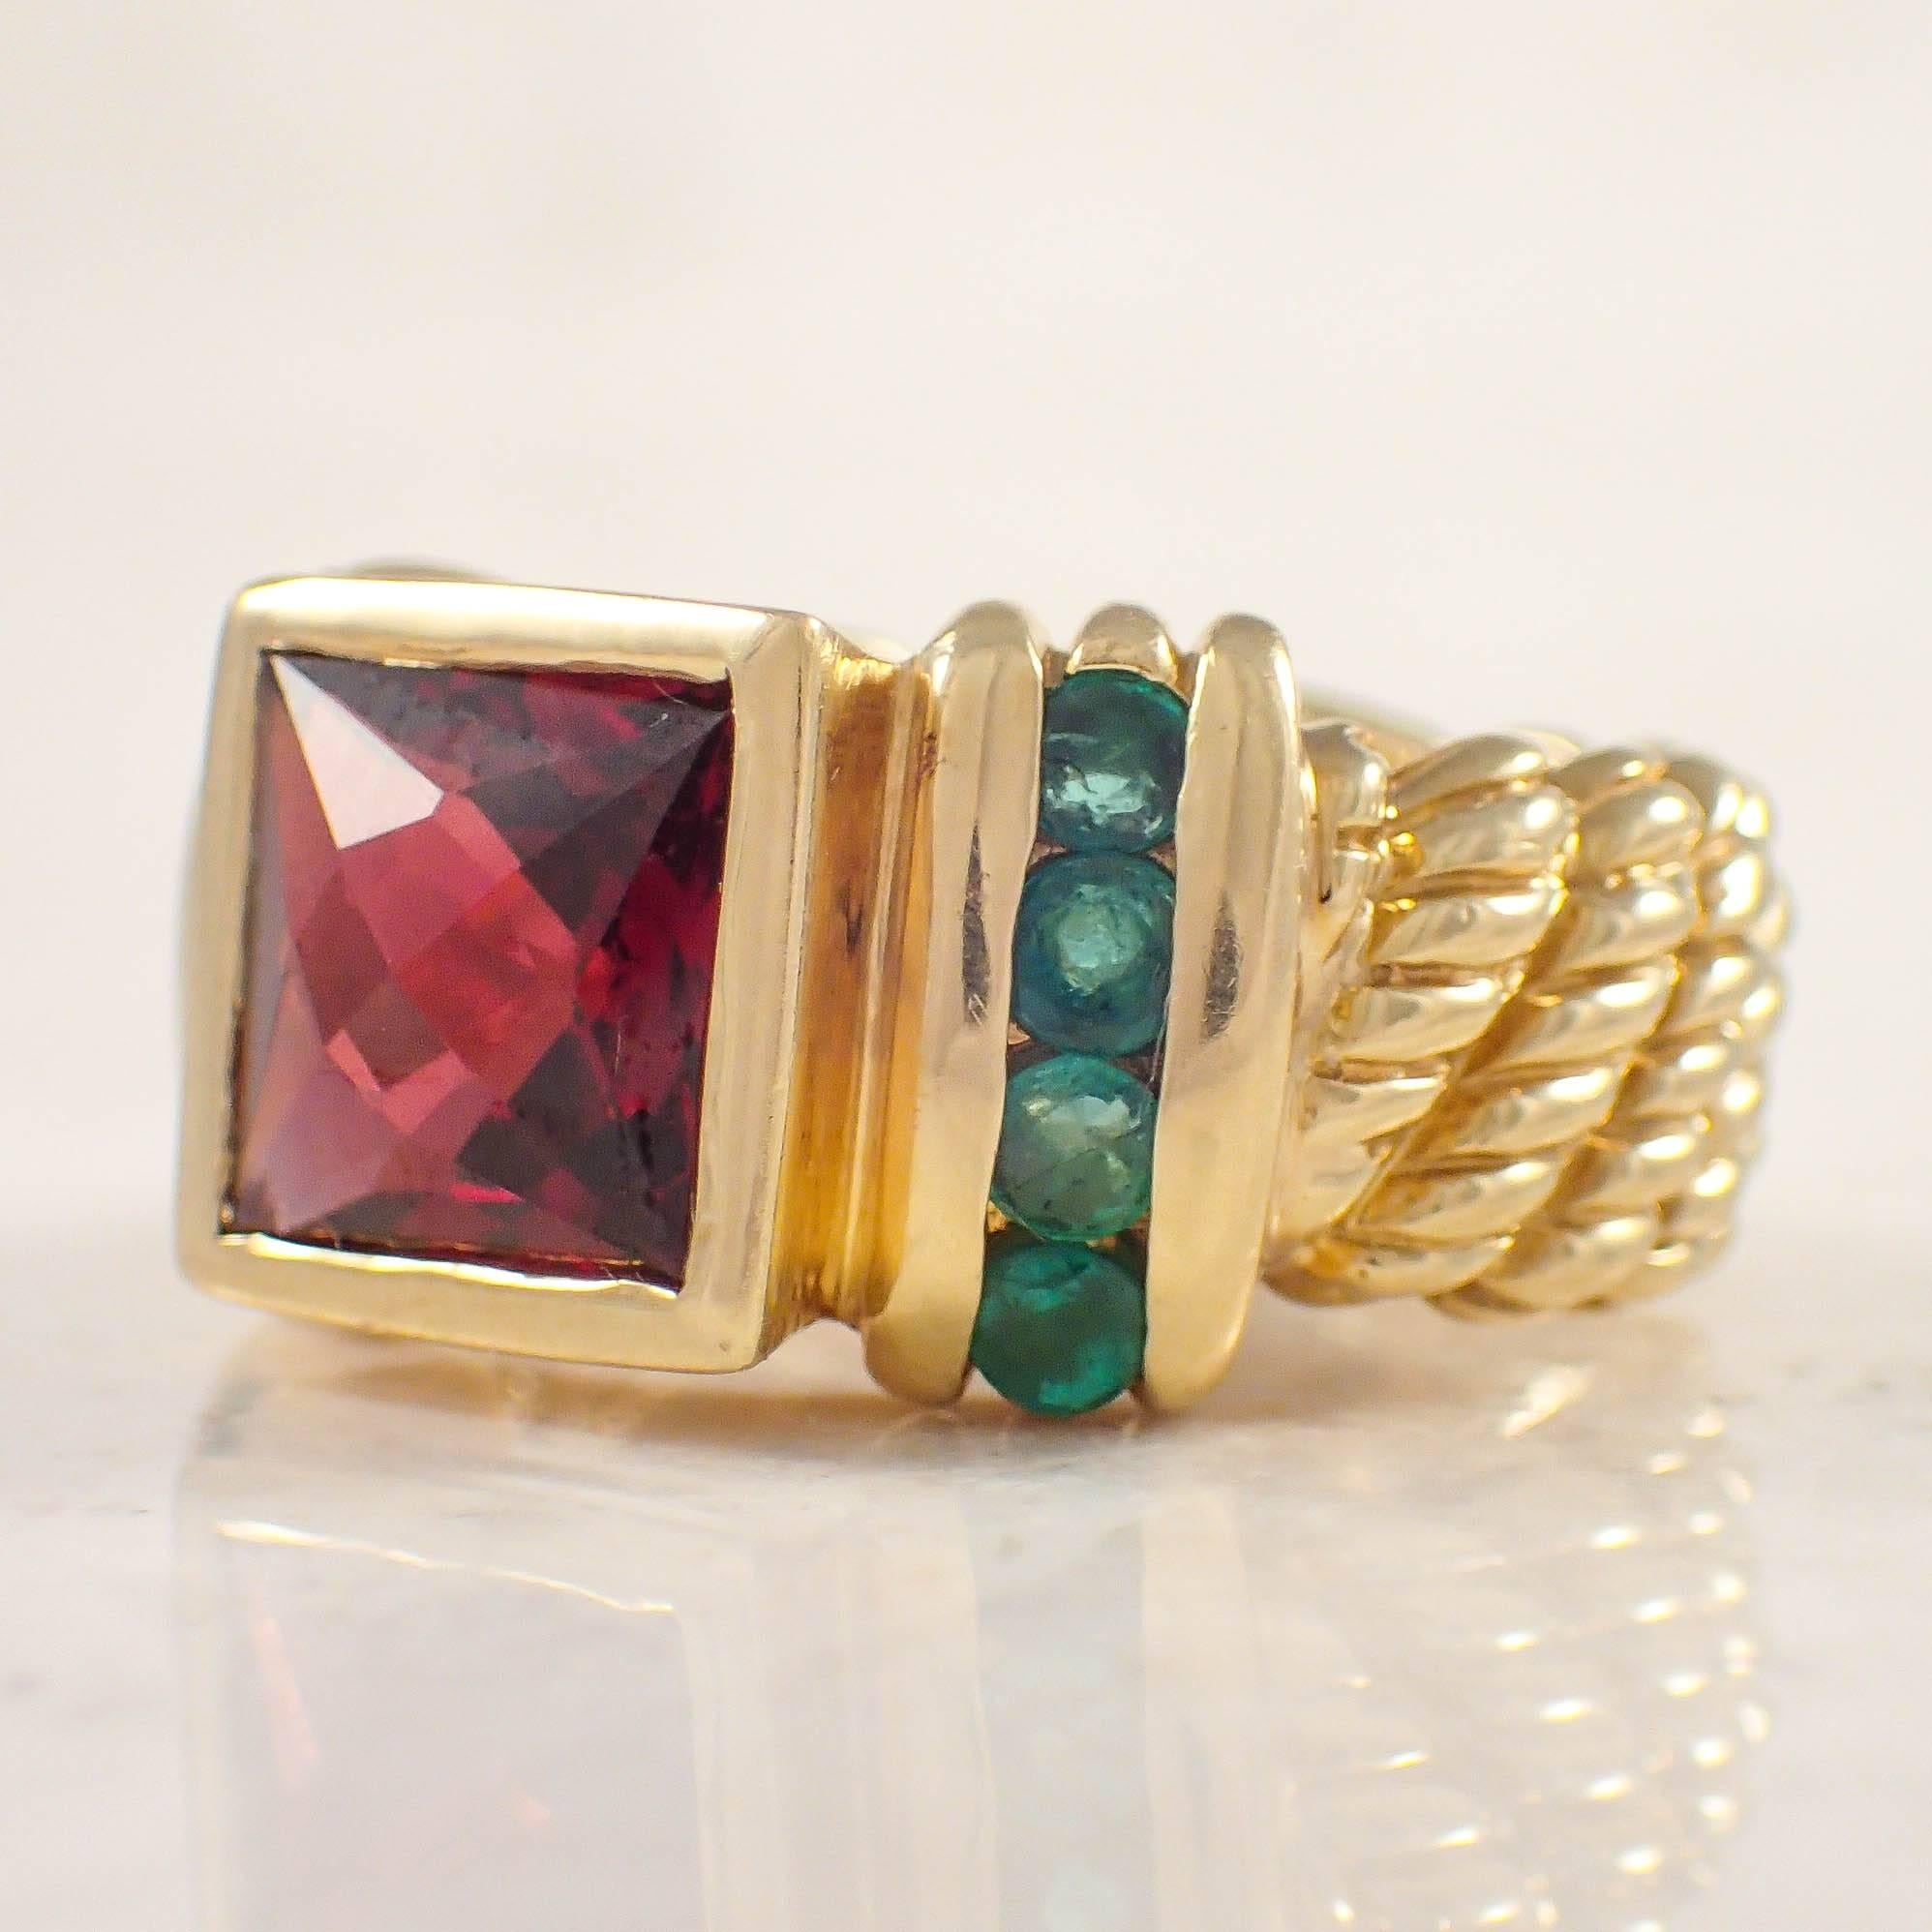 18K Yellow gold David Yurman garnet and emerald ring.  The twisted wire ring is bezel set with 1 square garnet measuring 10 mm, accented by 8 round emeralds. The ring weighs 11.9 grams. 
Stamped 